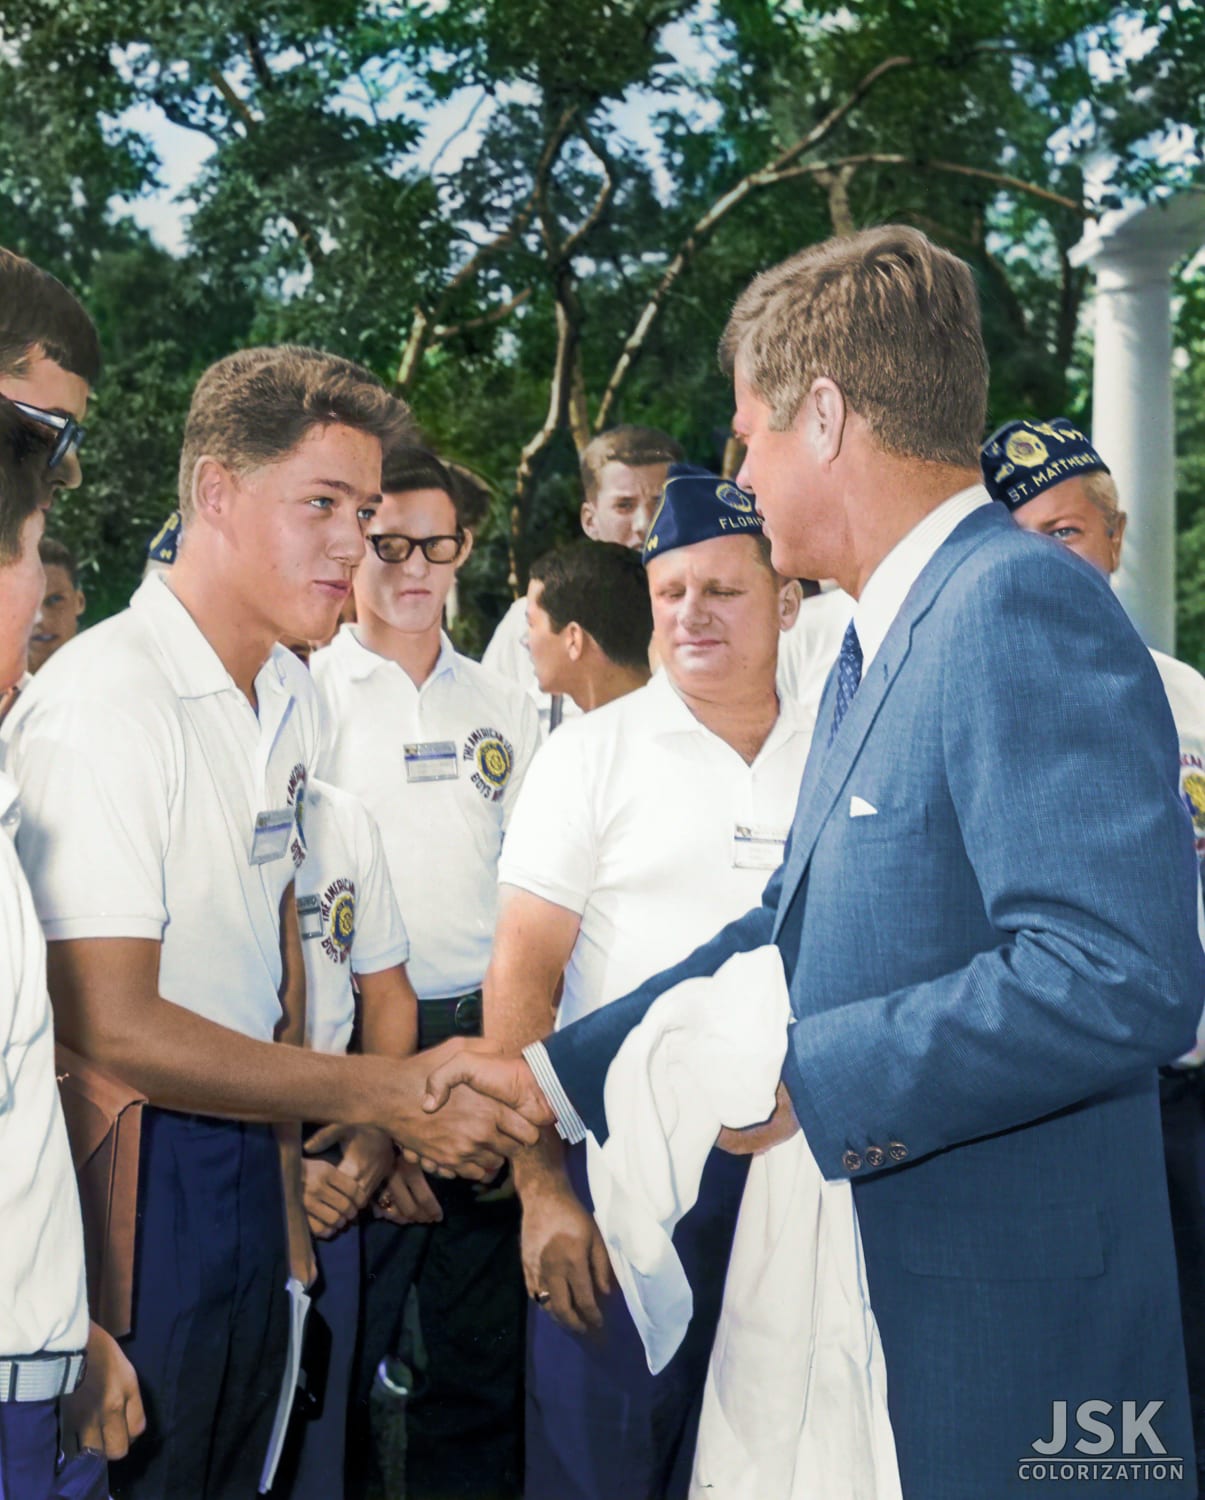 Future president Bill Clinton, a teenage boy, shakes the hand of President John F. Kennedy as other American Legion Boys Nation delegates look on during a trip to the White House in Washington in 1963. Photo by Arnold Sachs [Colorized]